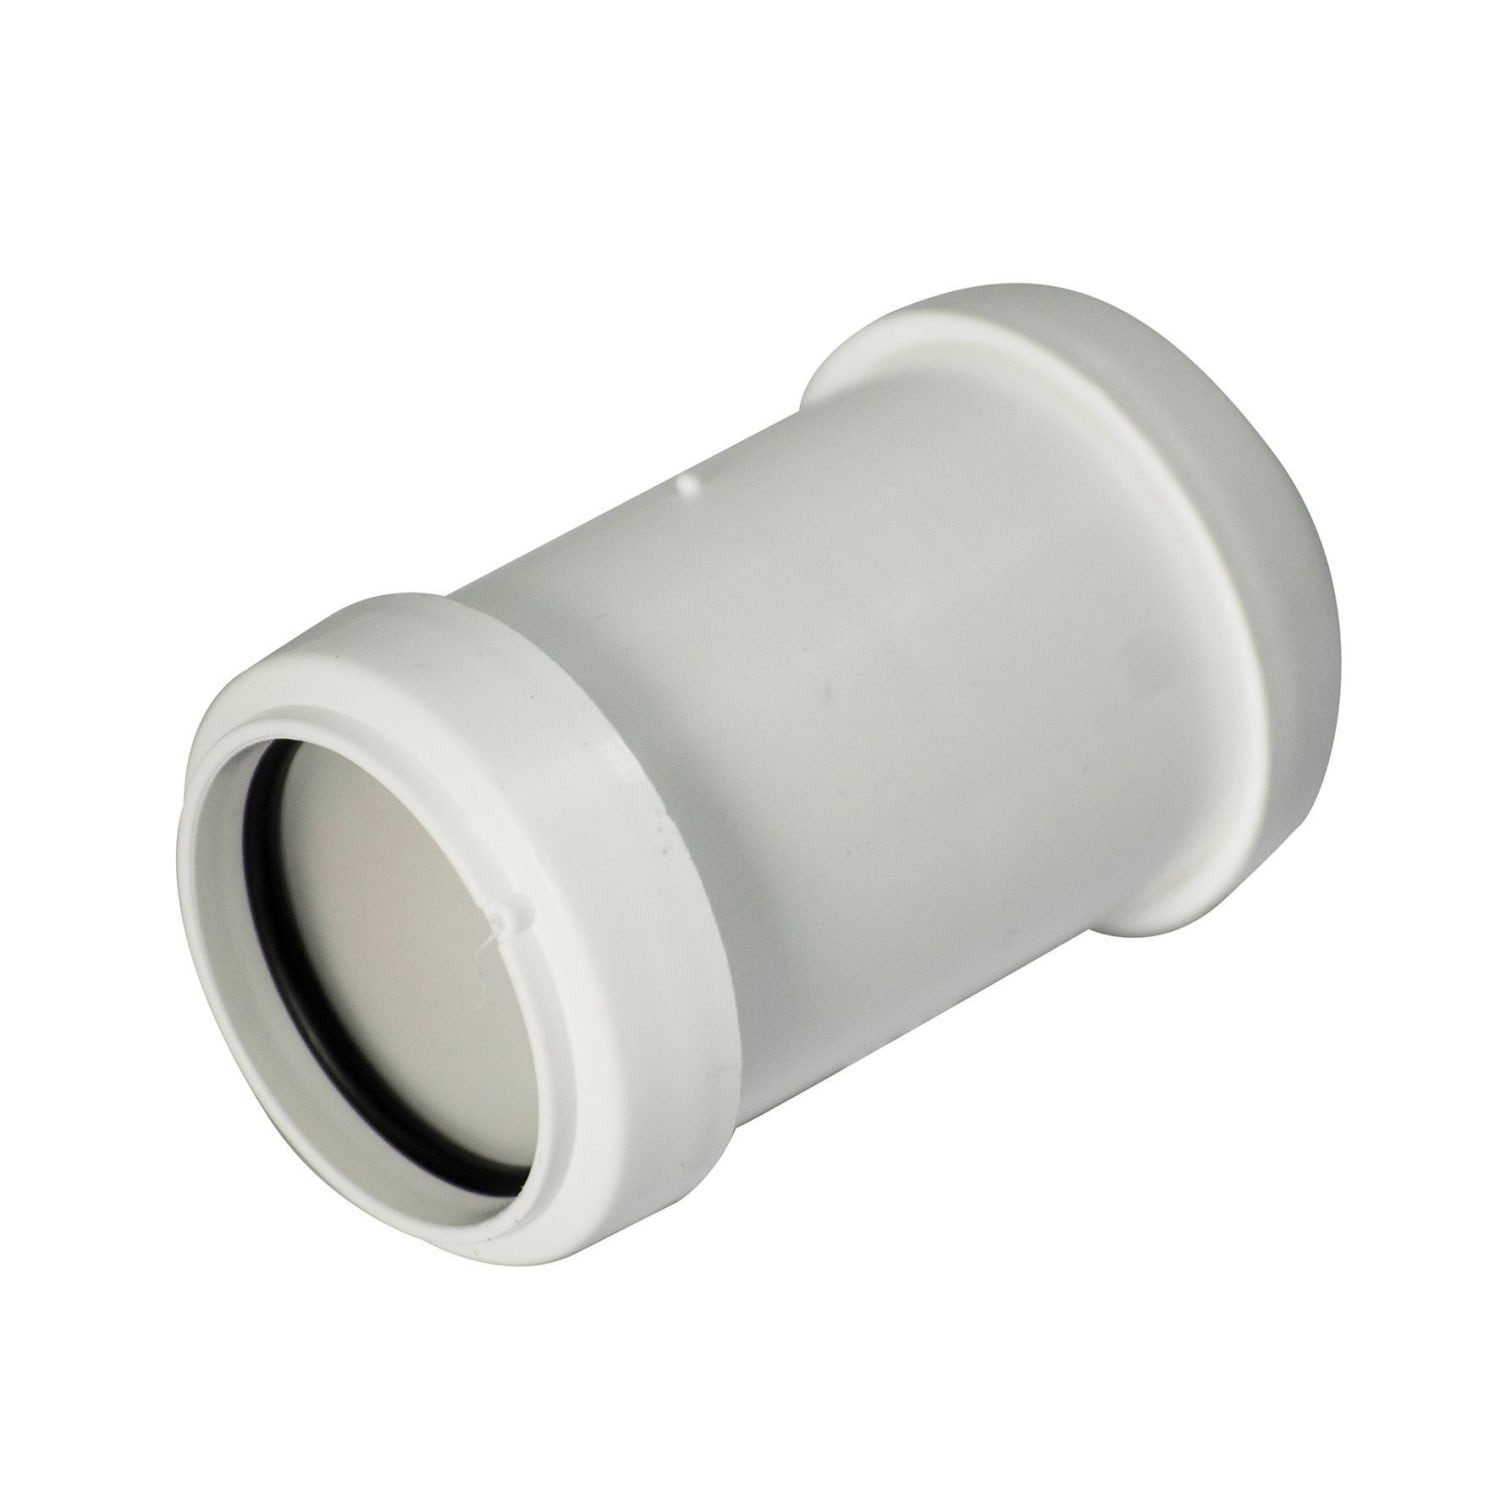 FLOPLAST 40mm 1.1/2" WHITE STRAIGHT COUPLING COUPLER CONNECTOR COMPRESSION WASTE 